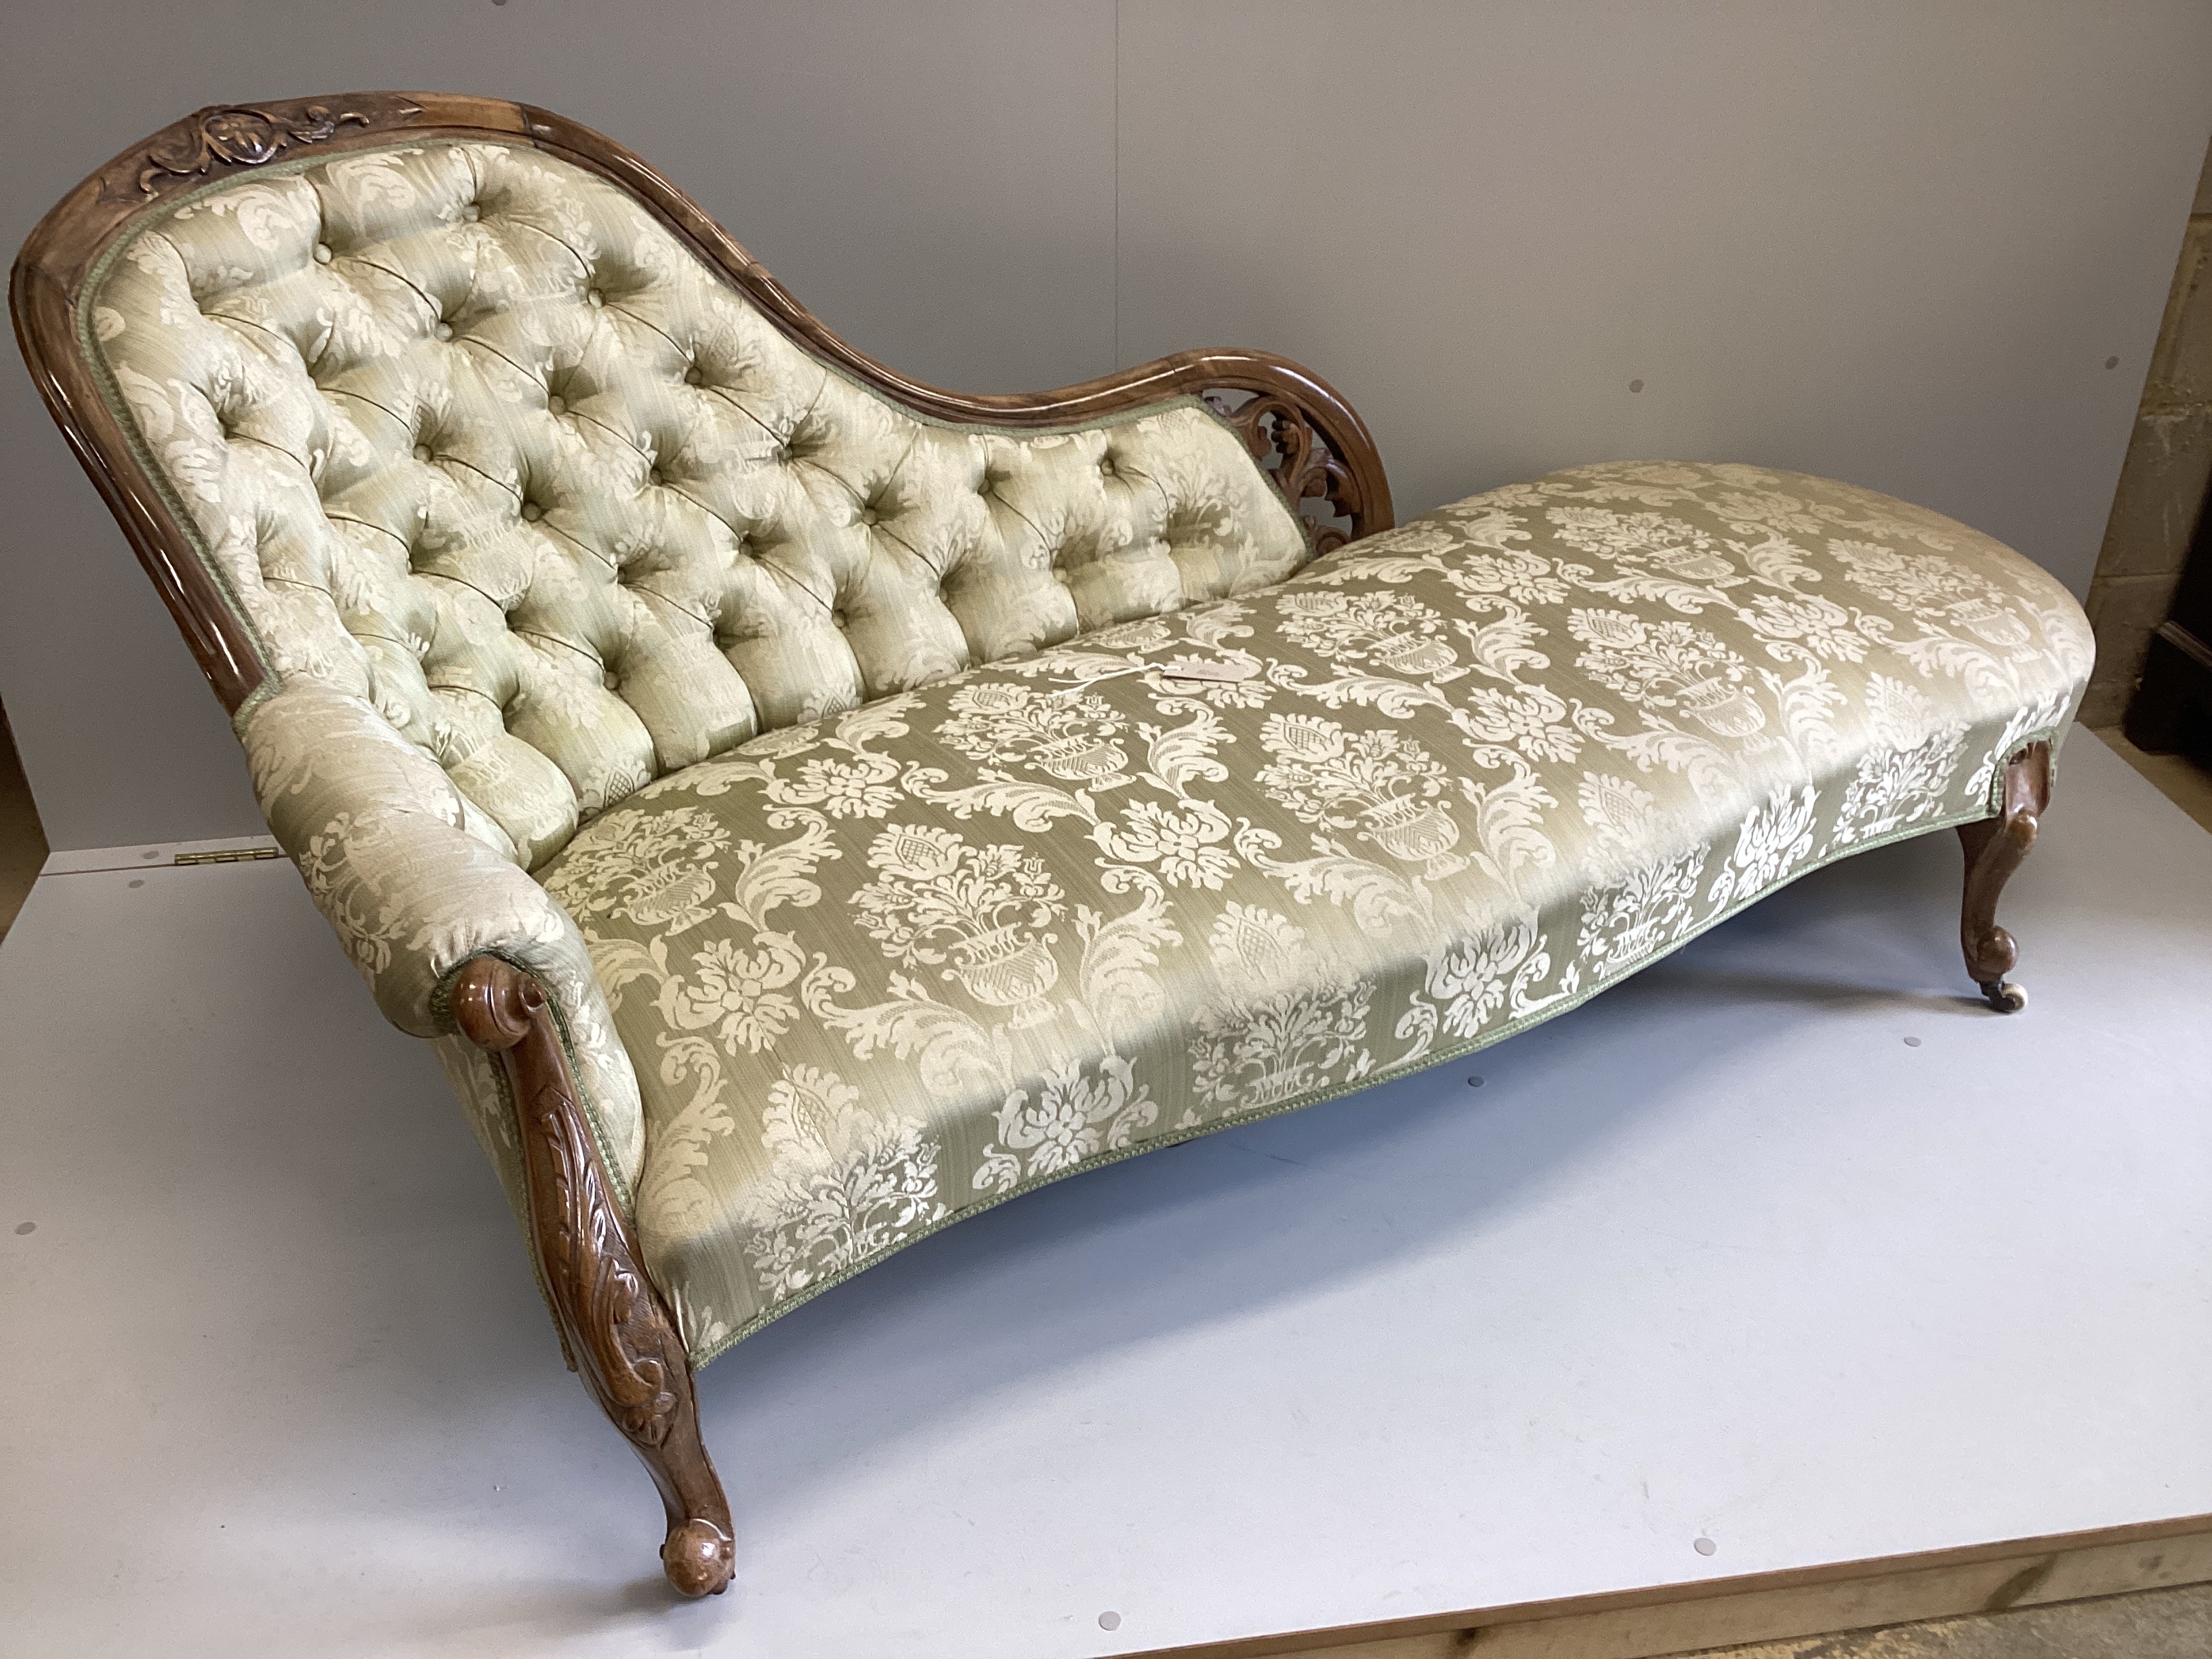 A Victorian walnut chaise longue with deep buttoned back, width 170cm, depth 75cm, height 87cm